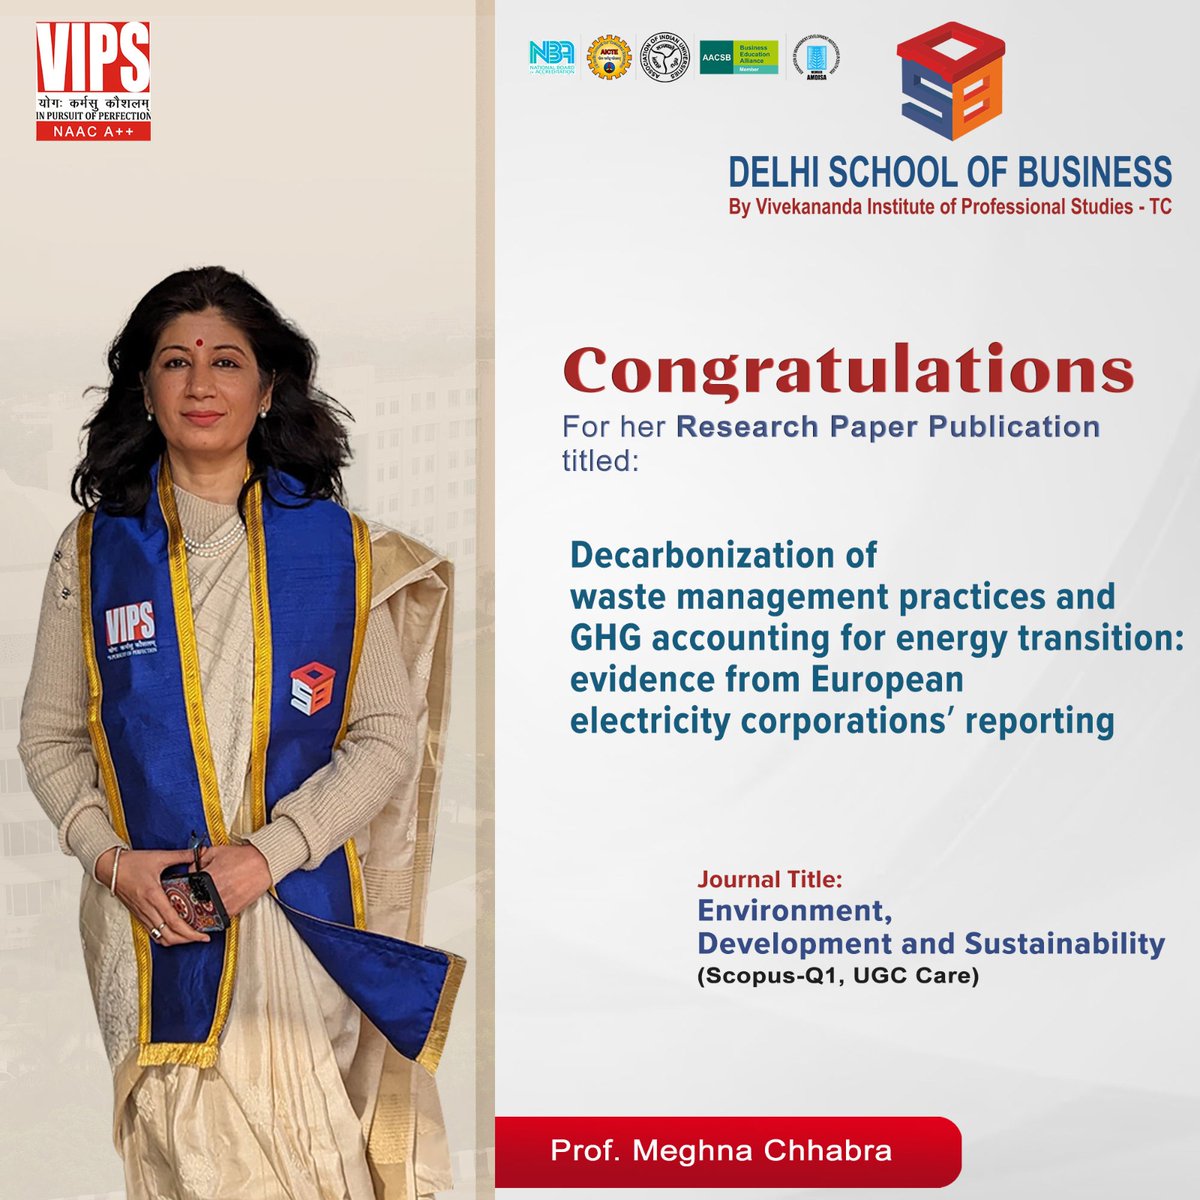 Prof. Meghna Chhabra's successful research paper publication titled 'Decarbonization of Waste Management Practices & GHG Accounting for Energy Transition: Evidence from European Electricity Corporations' Reporting' in the Journal Environment, Development and Sustainability.